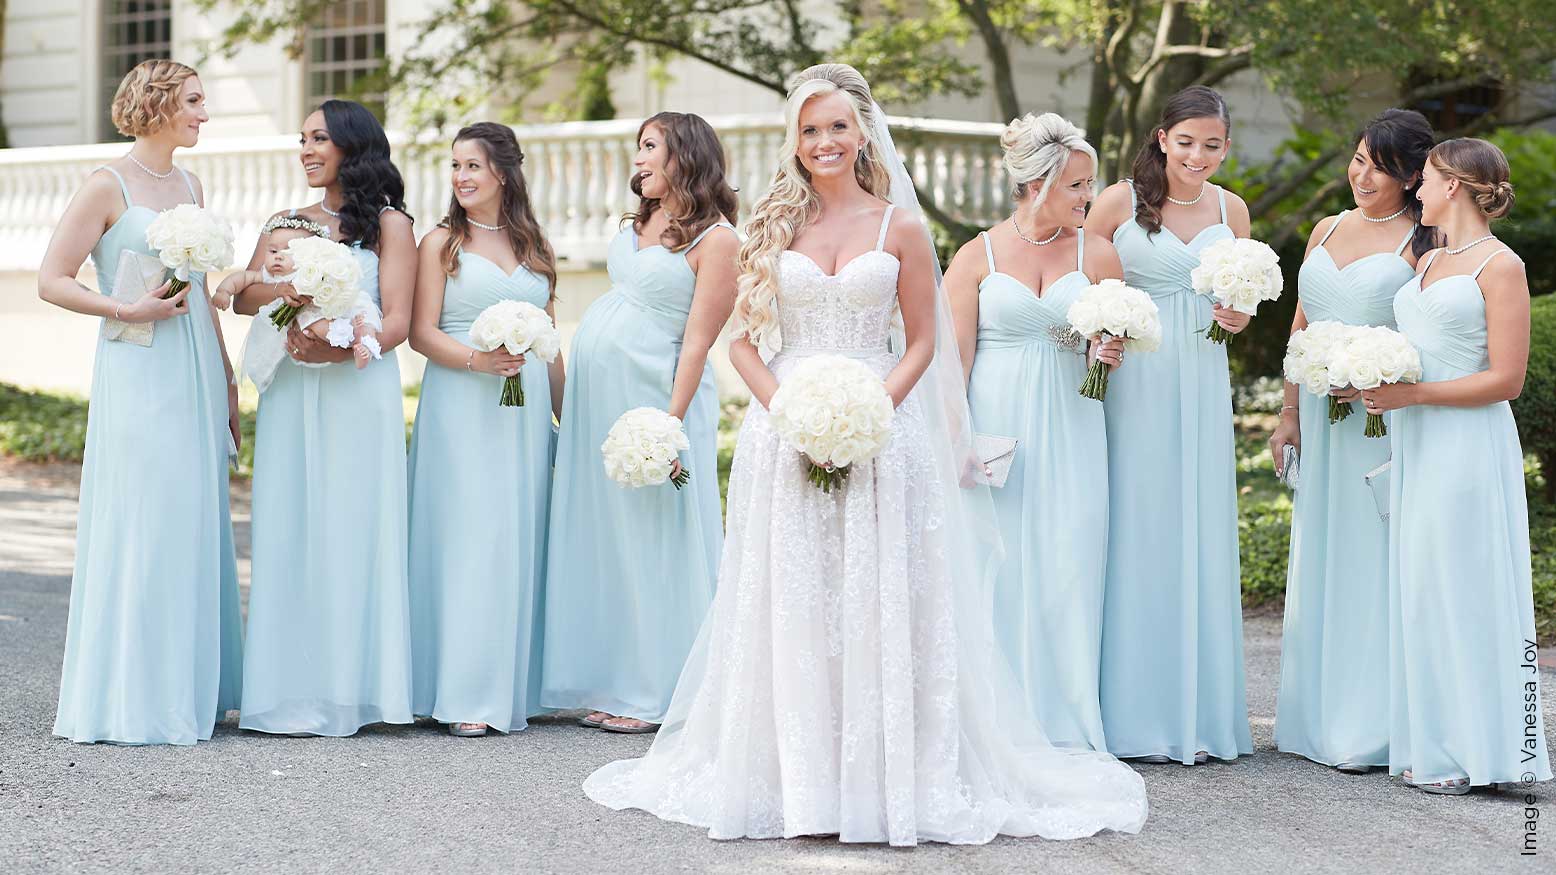 5 Tips on How to Photograph Bridesmaids